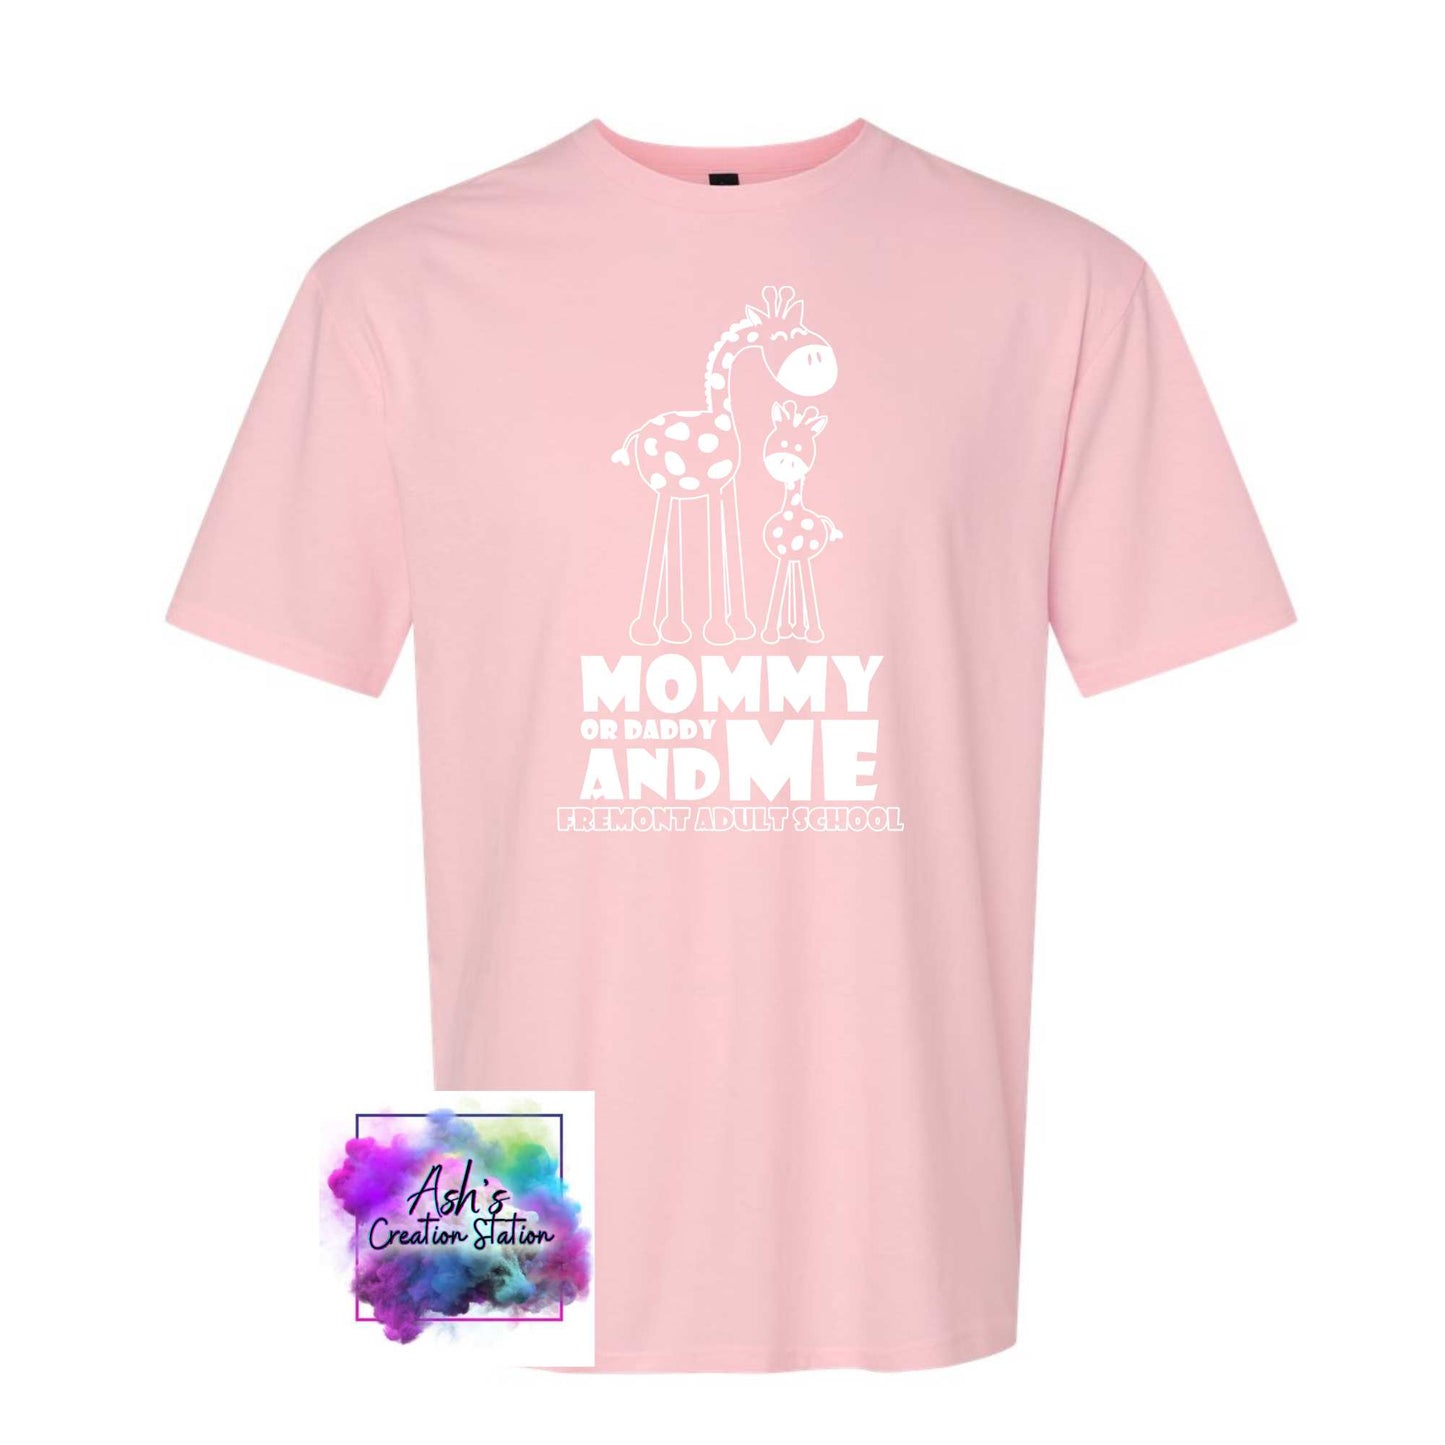 Mommy or Daddy & Me - FACE Tshirts